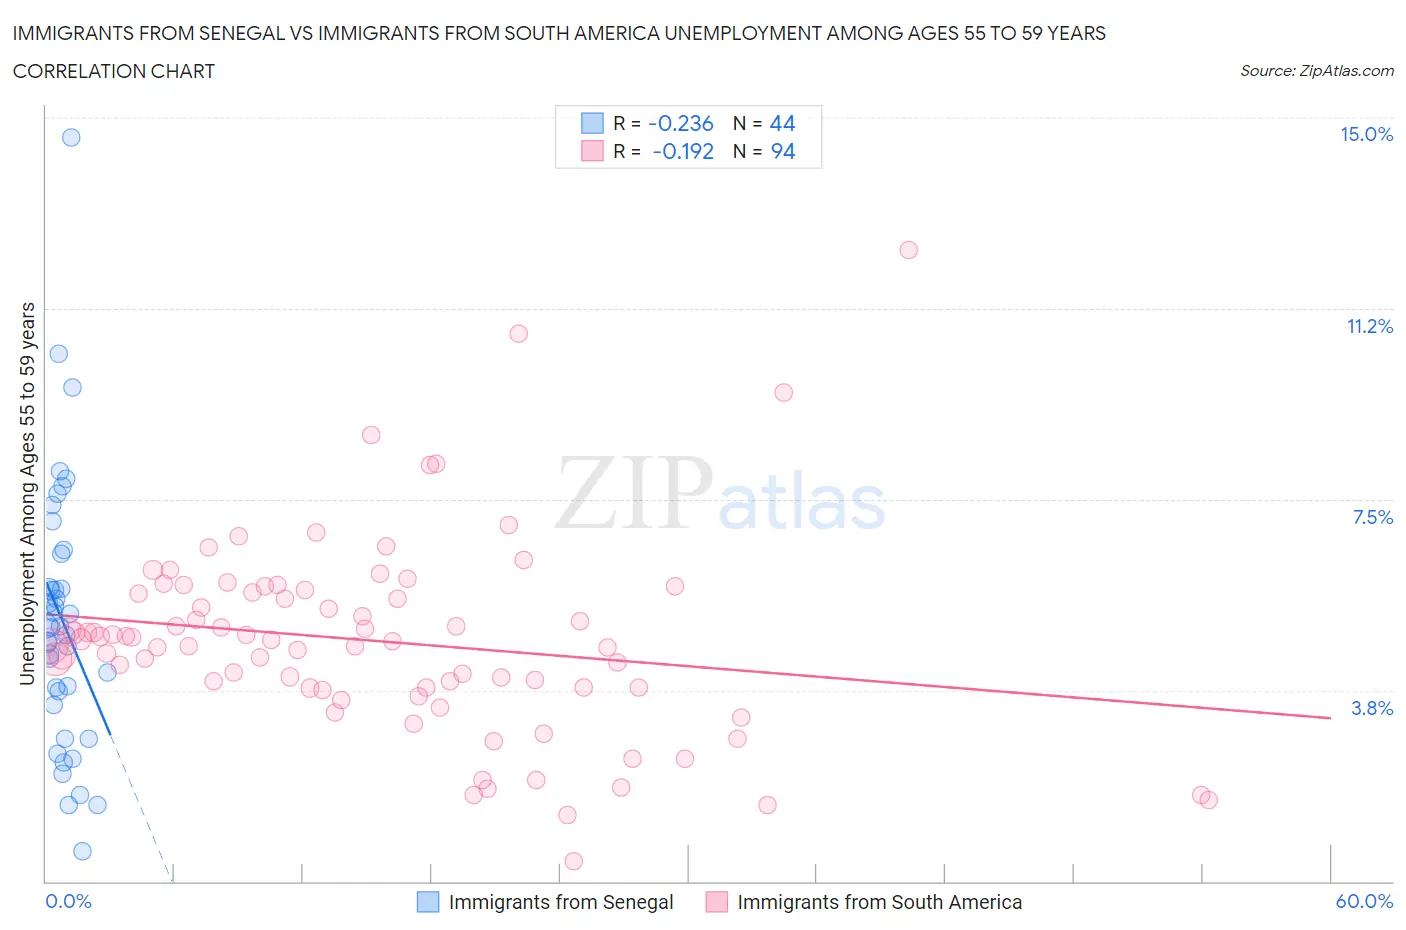 Immigrants from Senegal vs Immigrants from South America Unemployment Among Ages 55 to 59 years